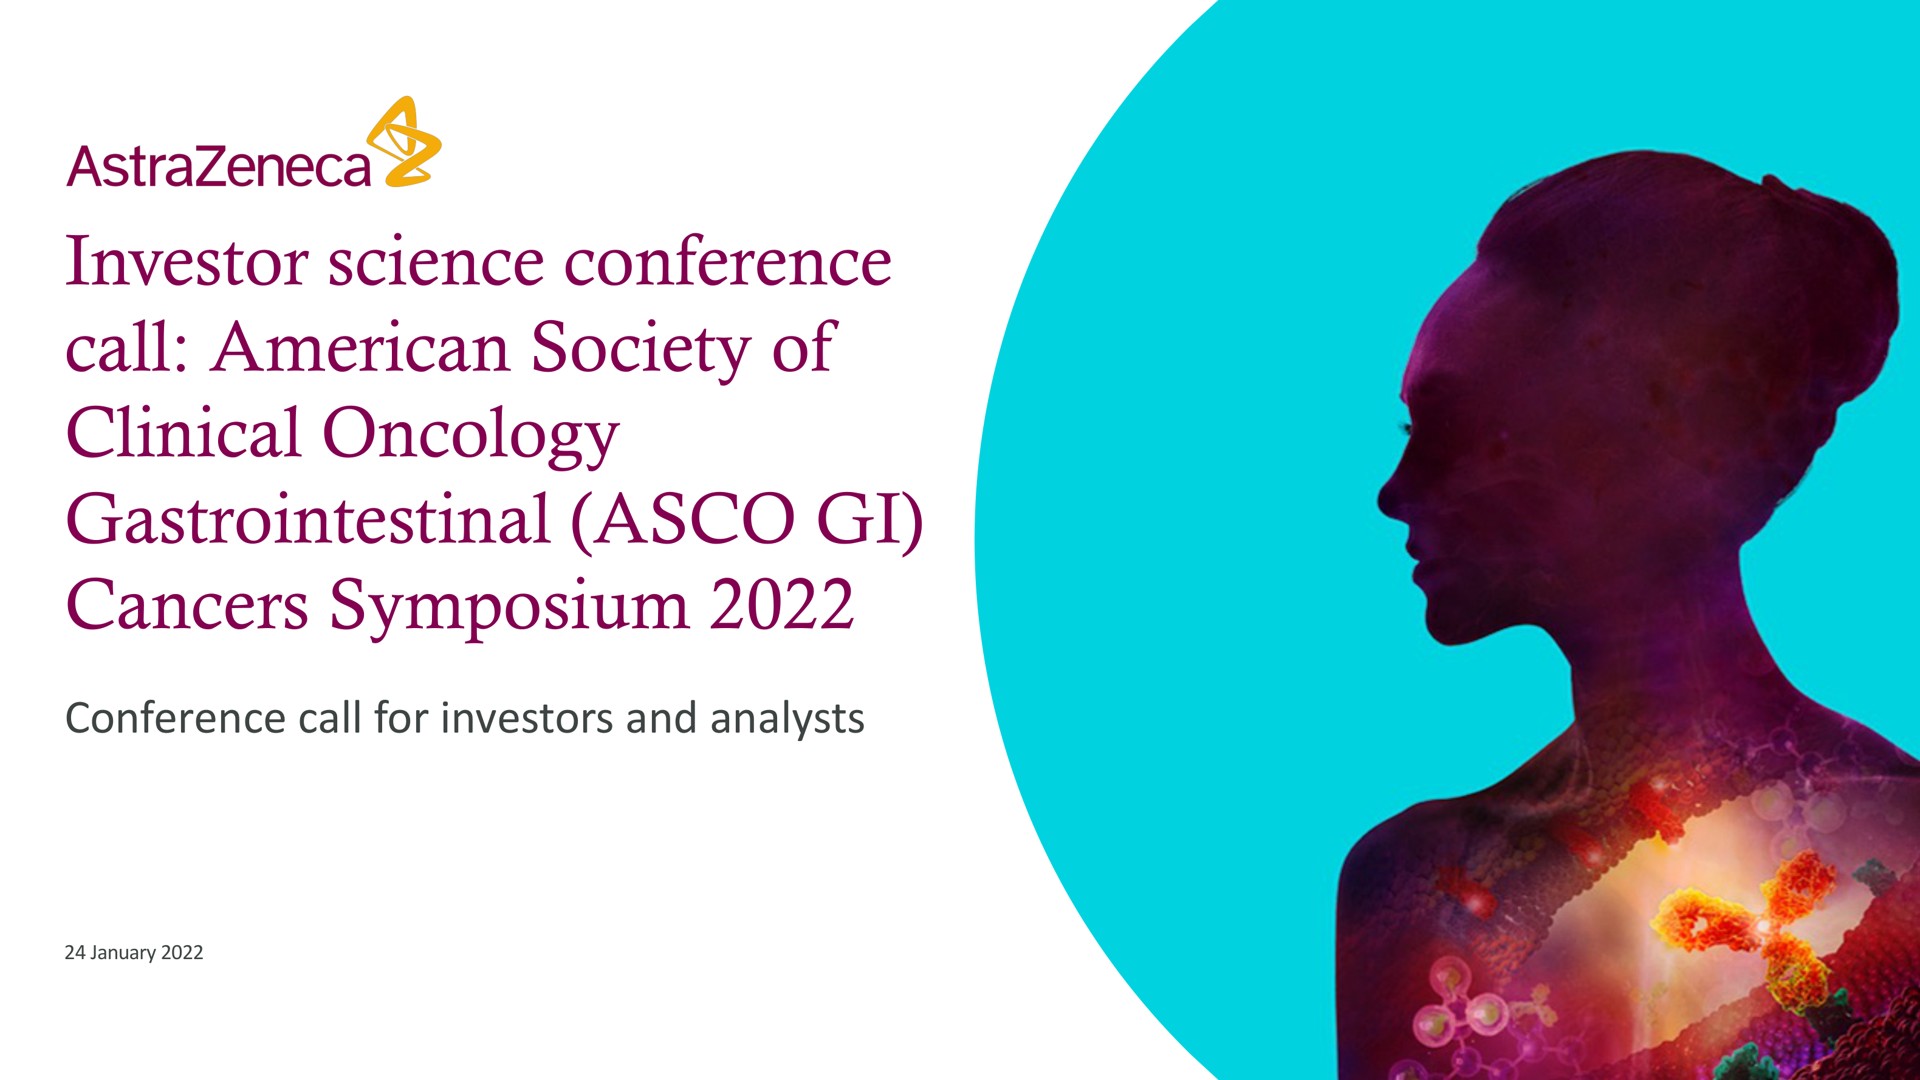 investor science conference call society of clinical oncology gastrointestinal cancers symposium | AstraZeneca